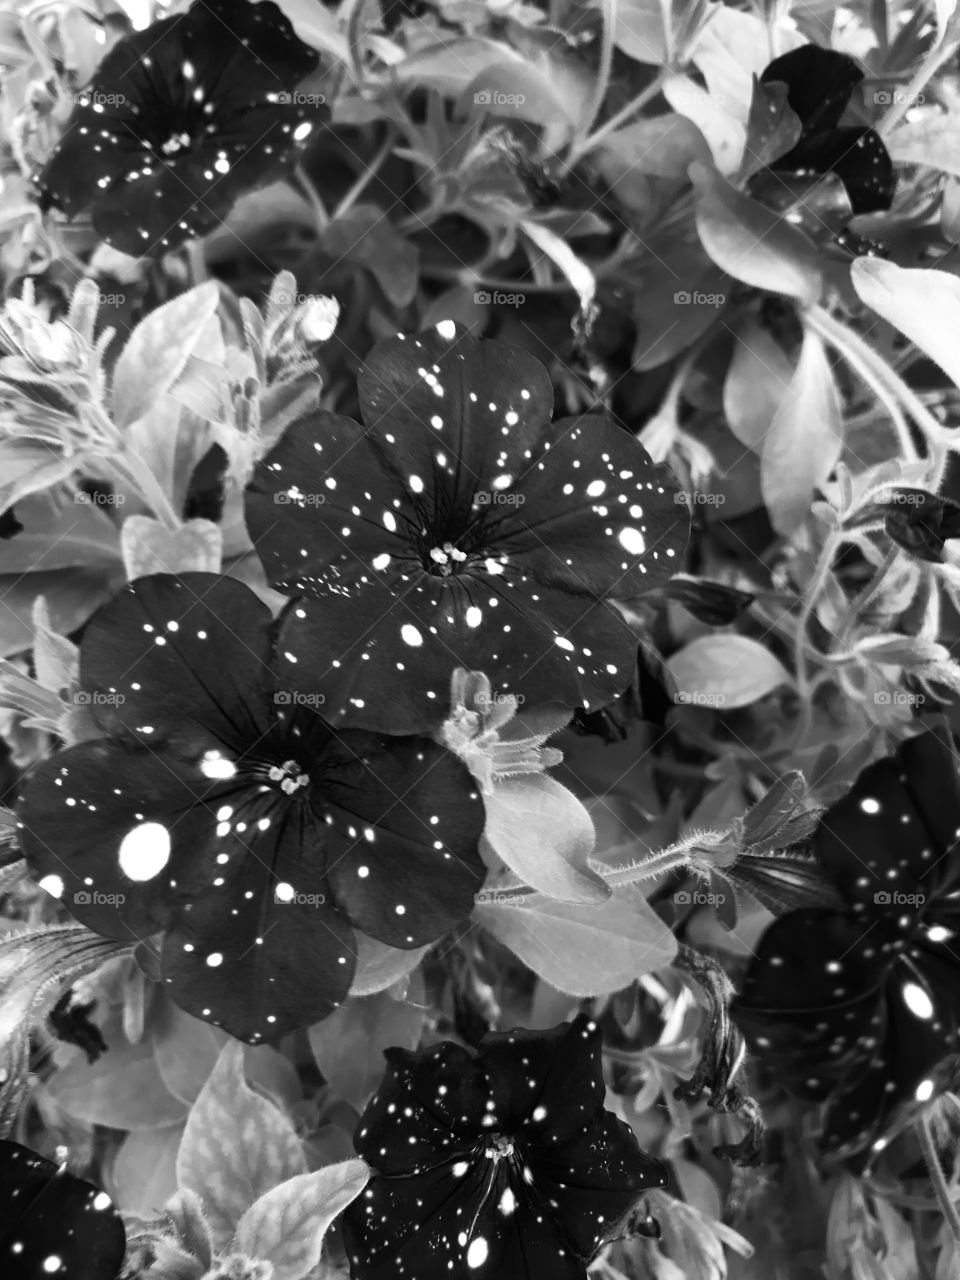 If all I could see was black and white these flowers would remain extremely beautiful even if colors returned to my sight. 